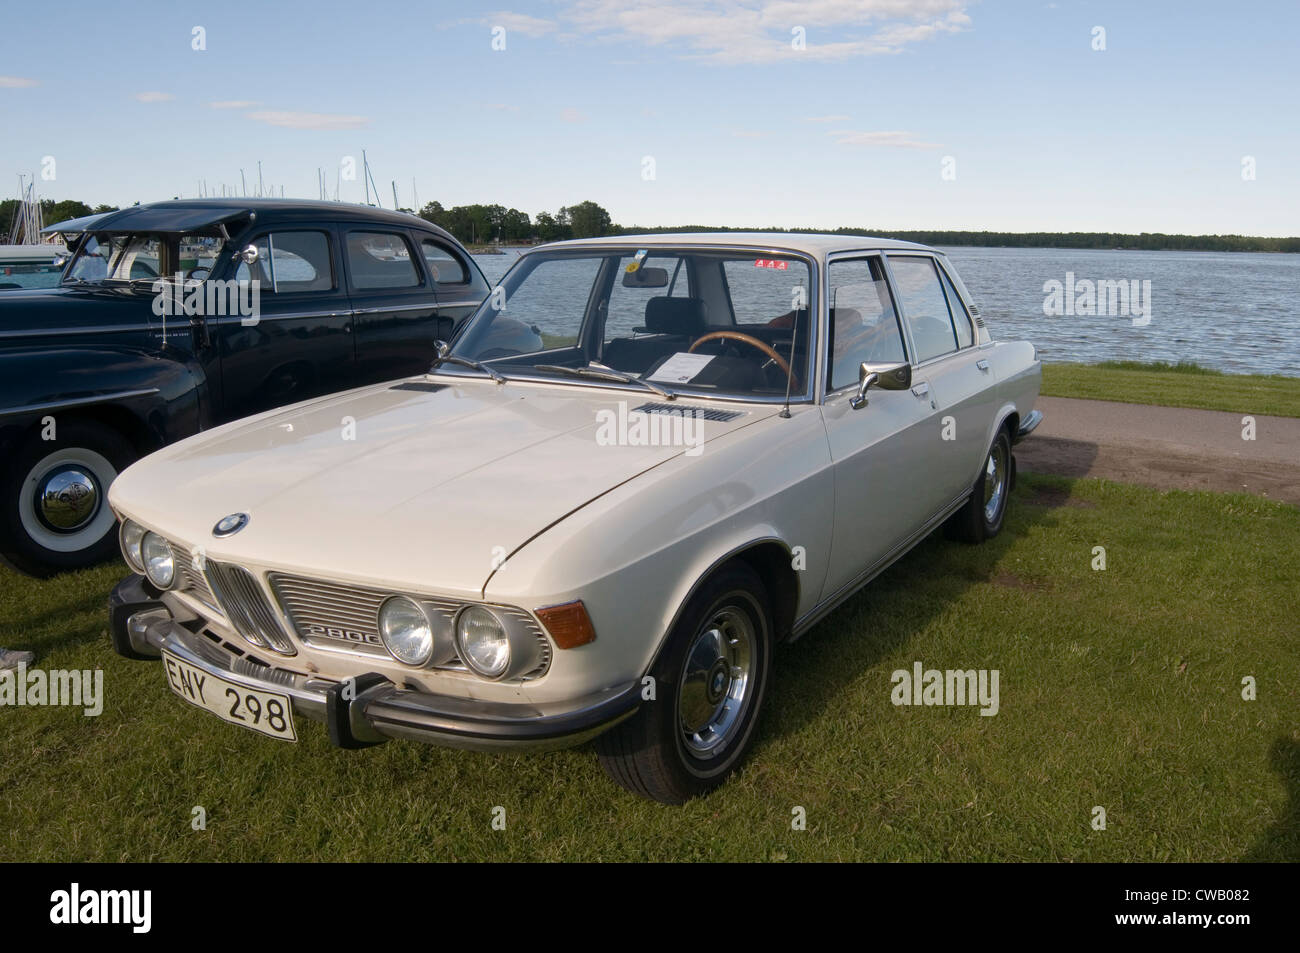 bmw 5 series classic old saloon car cars Stock Photo